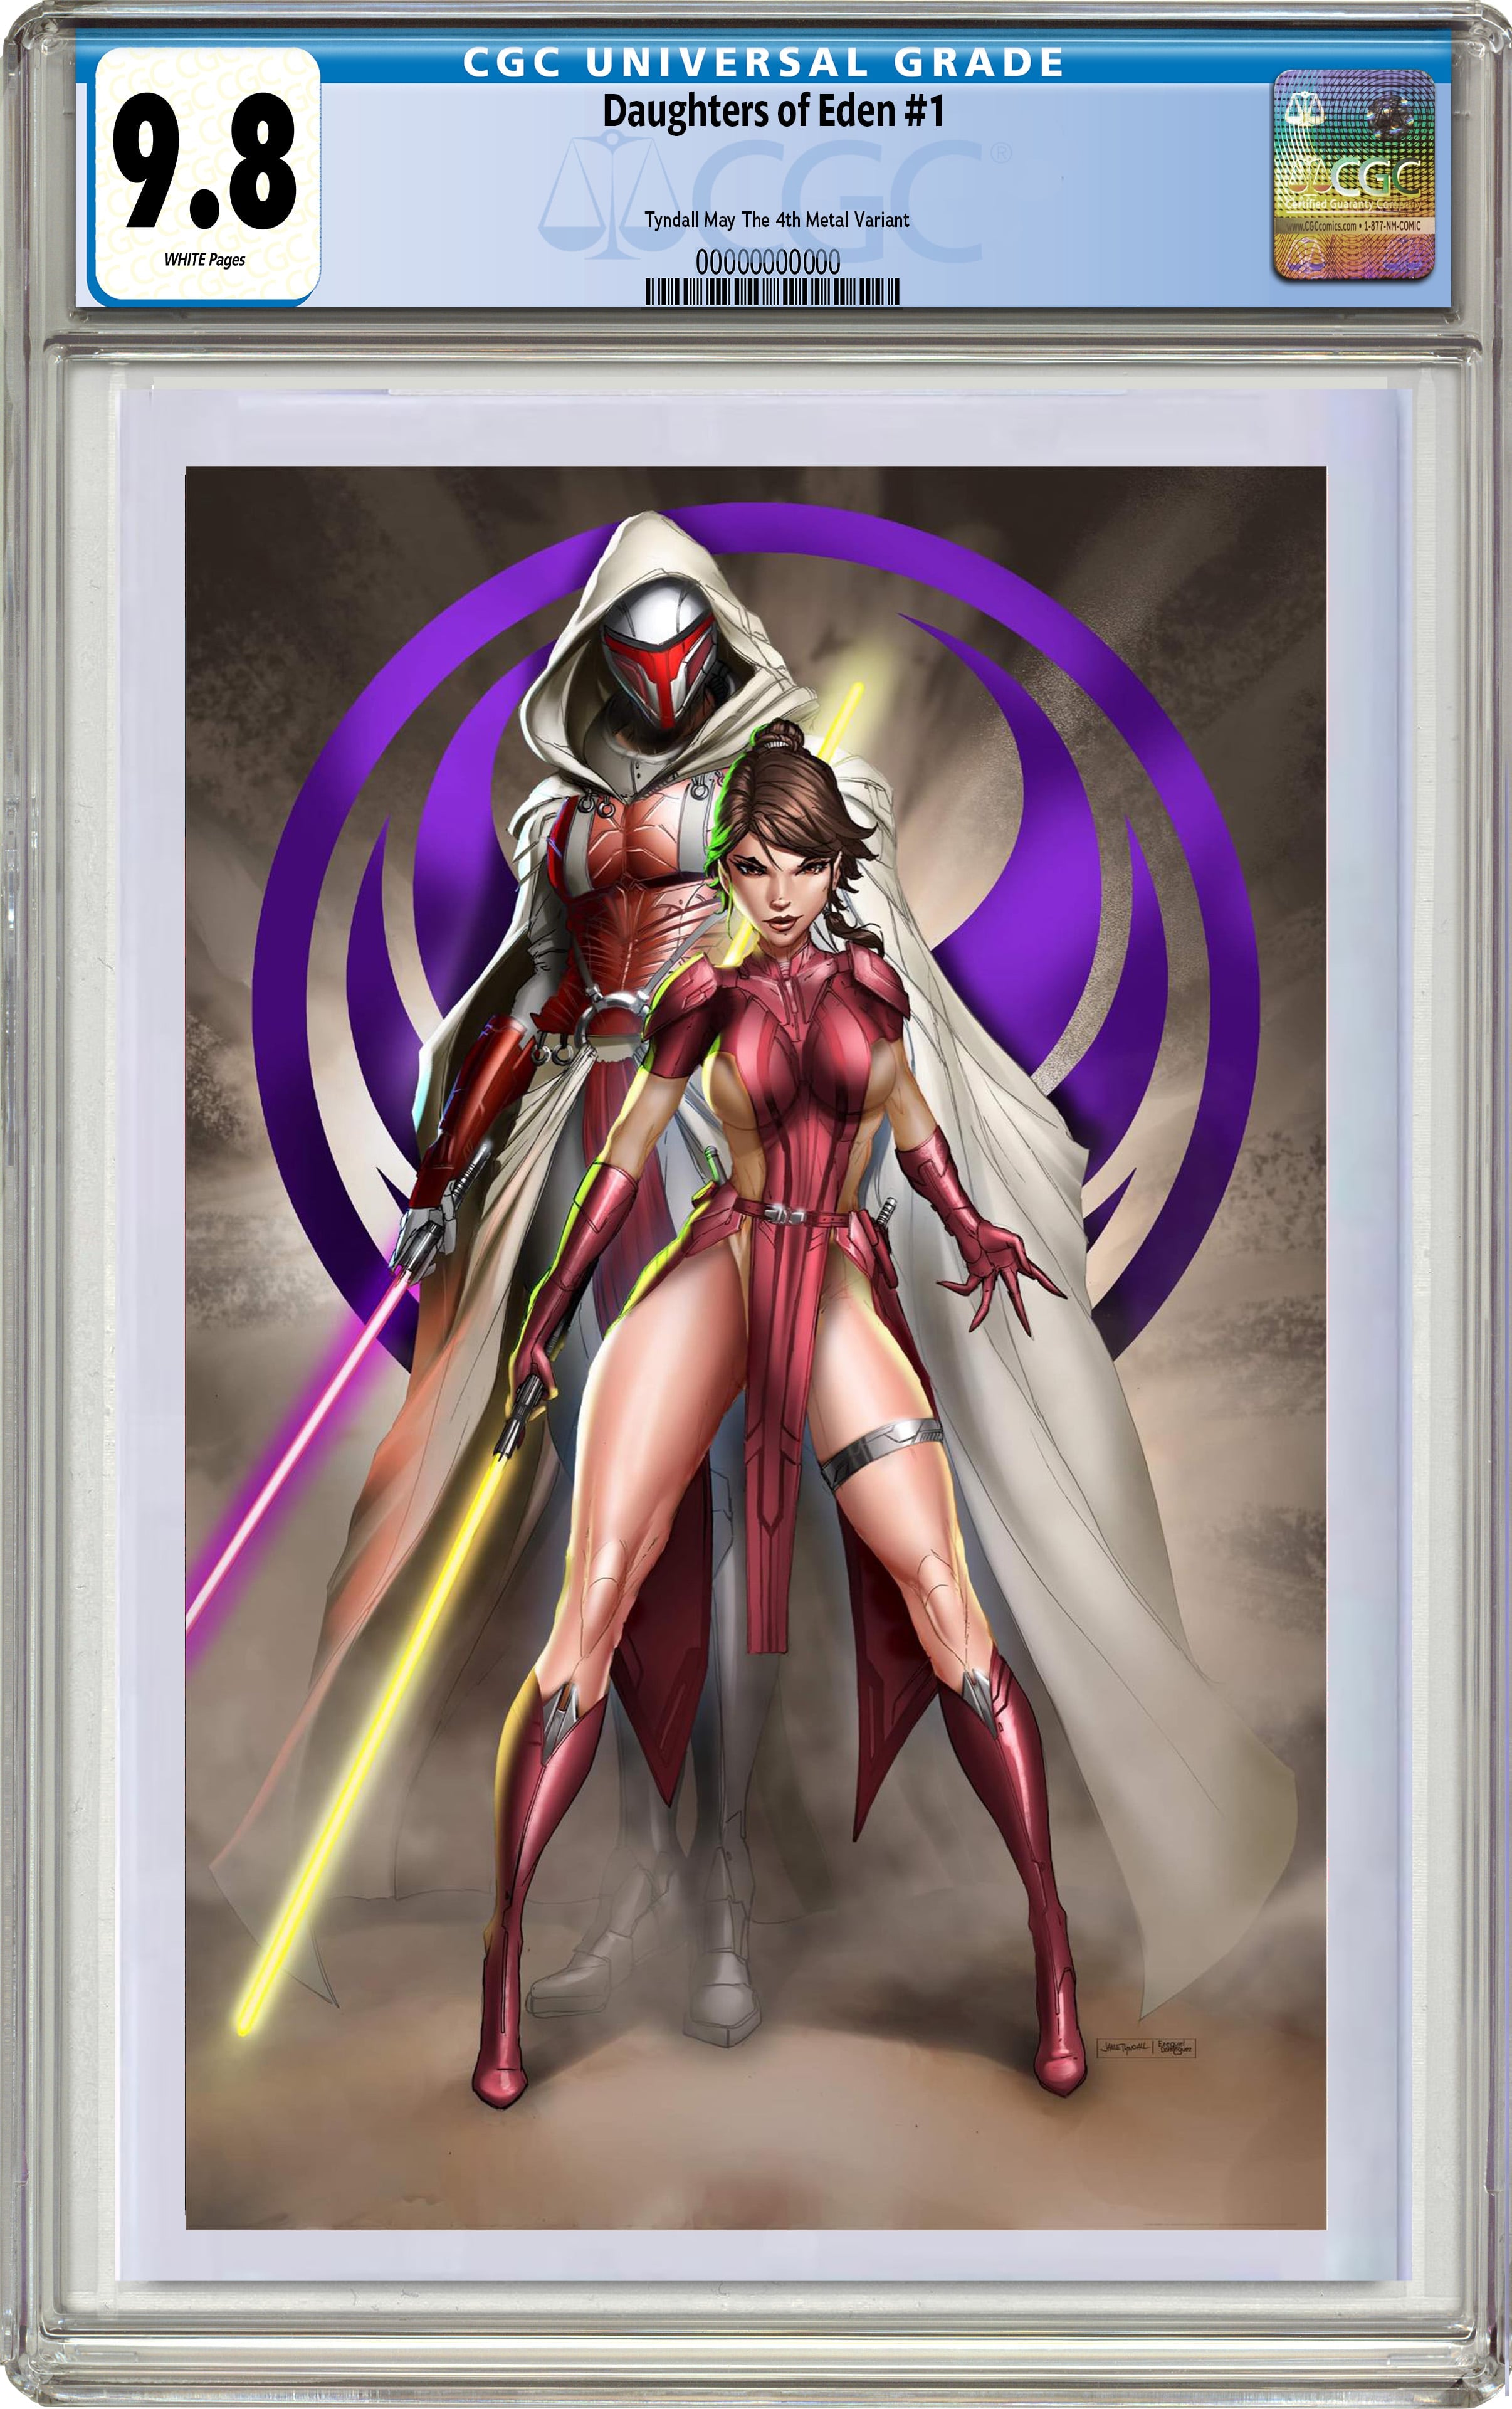 DAUGHTER'S OF EDEN #1 JAMIE TYNDALL MAY THE 4TH JEDI REVAN EXCLUSIVE VARIANT OPTIONS